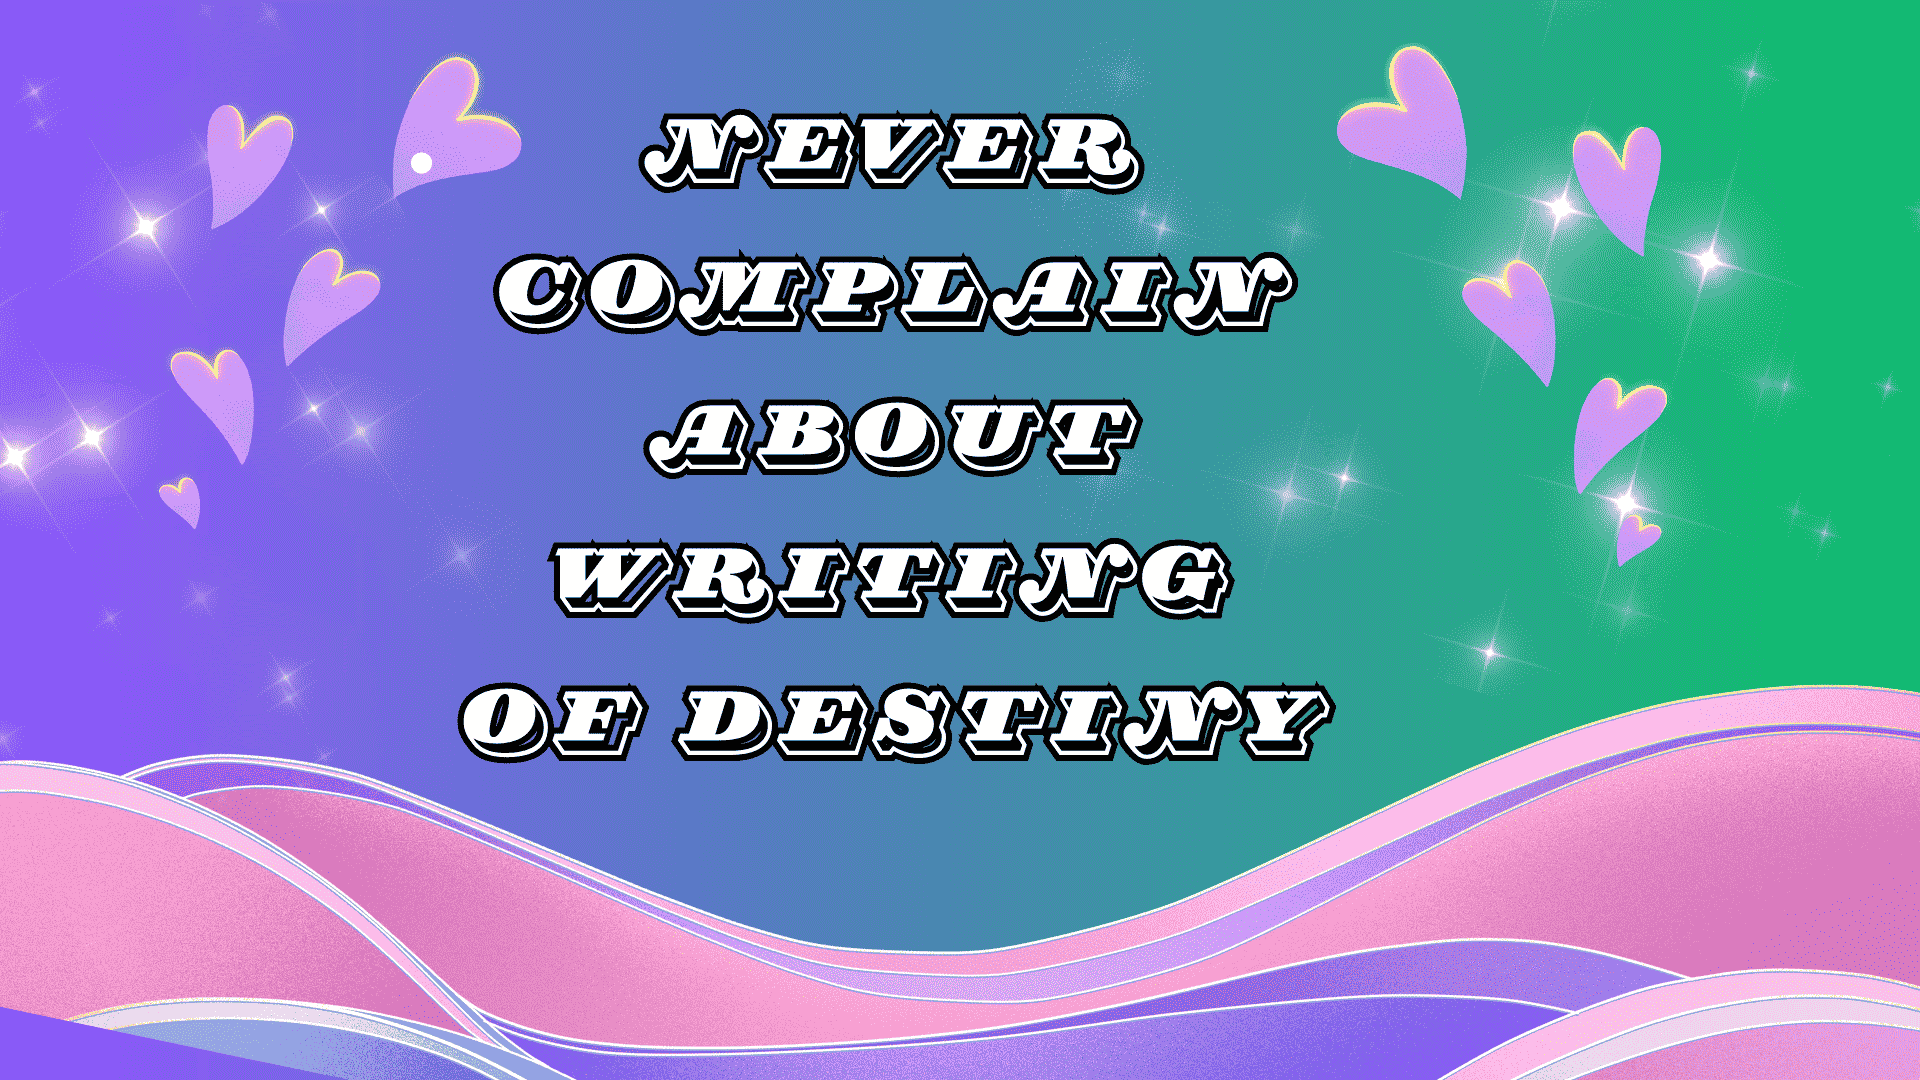 Never complain about writing of destiny